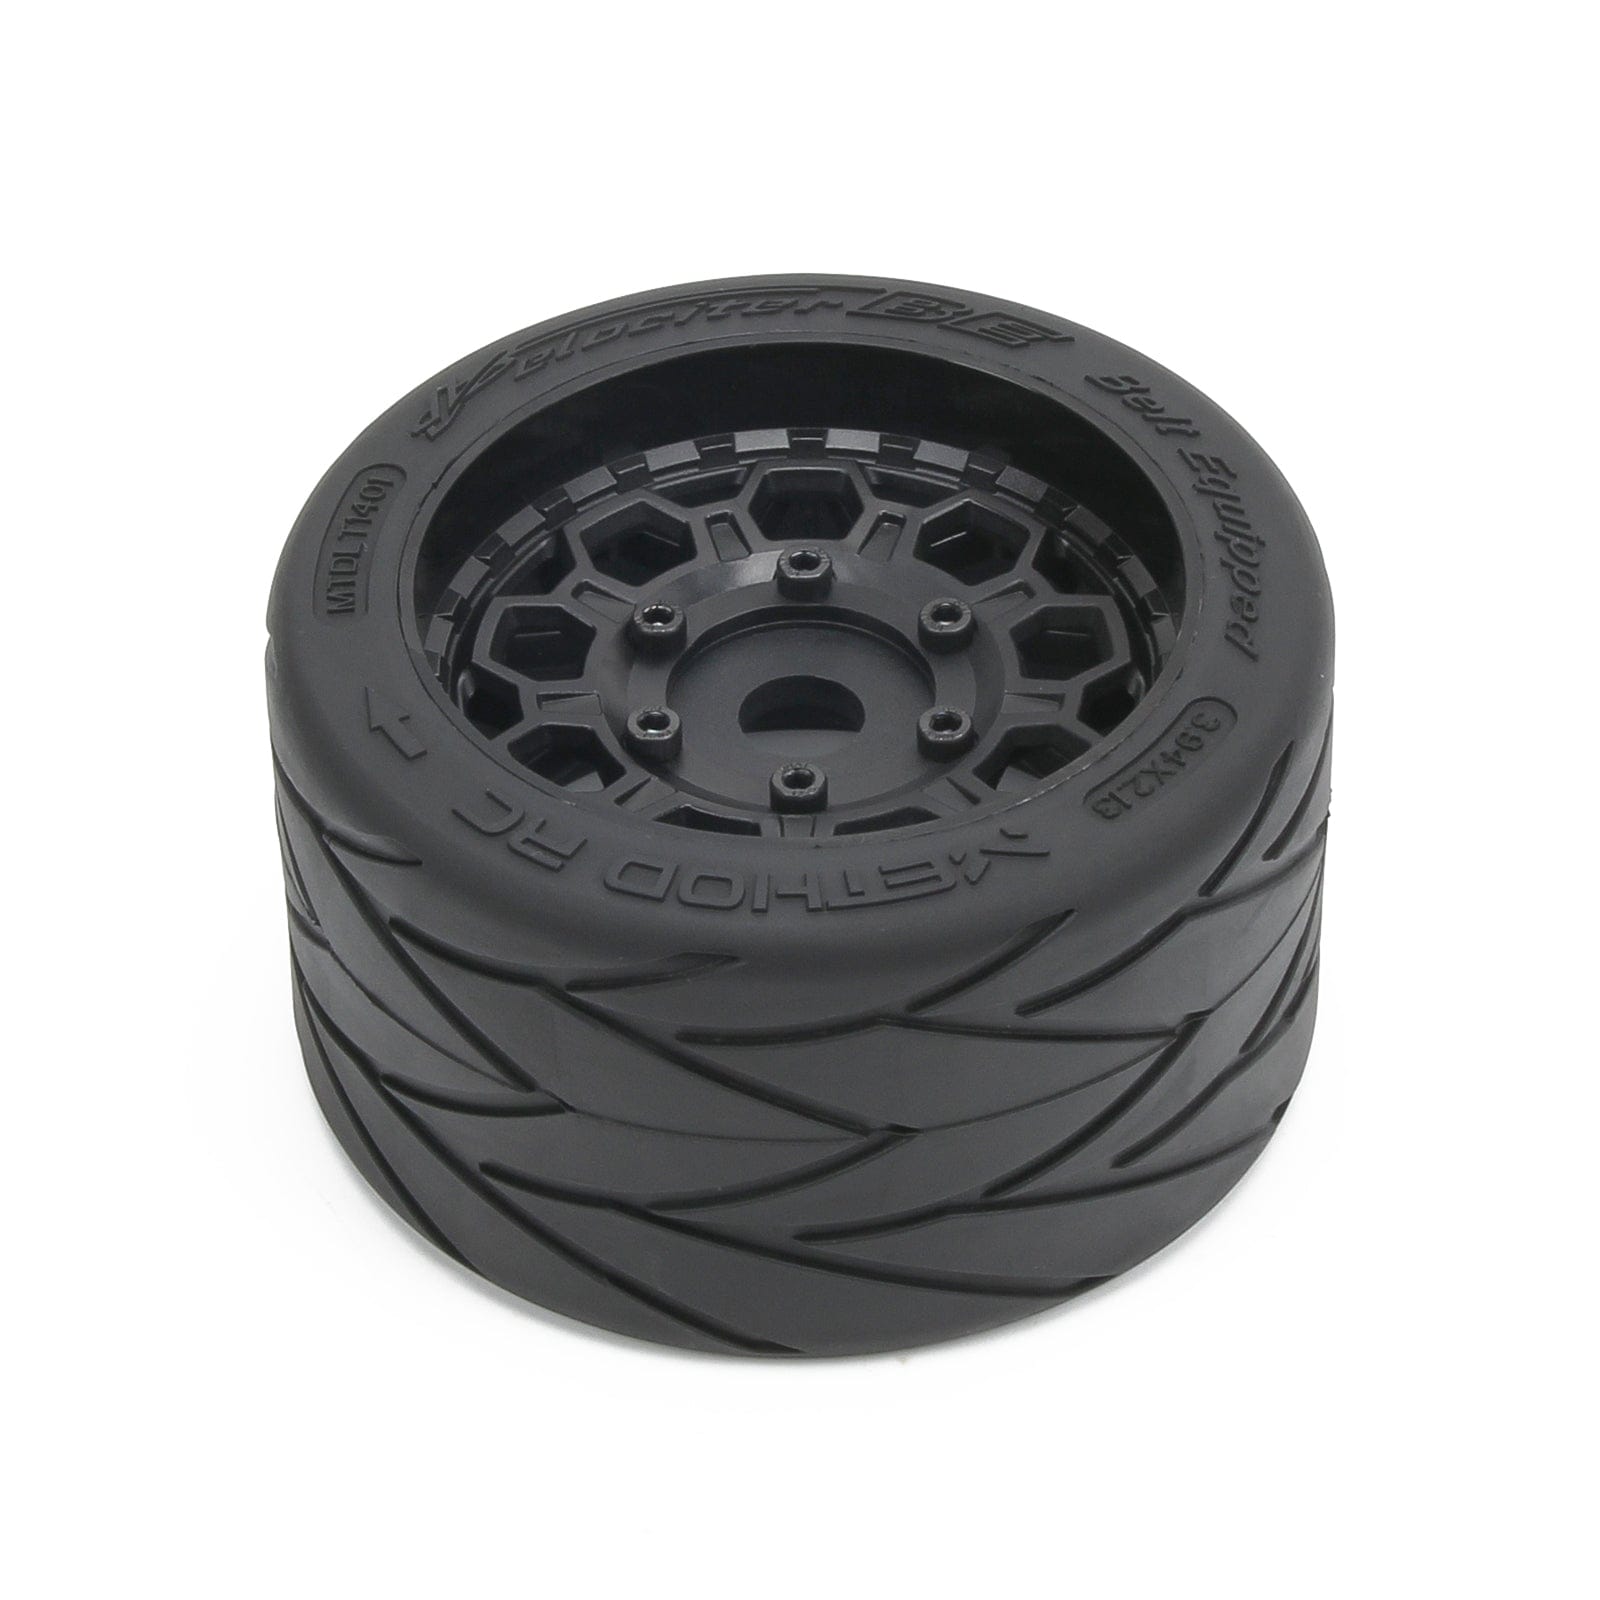 Method RC Tire and Wheel Velociter Belted 1/7th On-Road Tires on Hive 17mm Hex Wheels, Rear, 54/100 (2pcs, Glued)